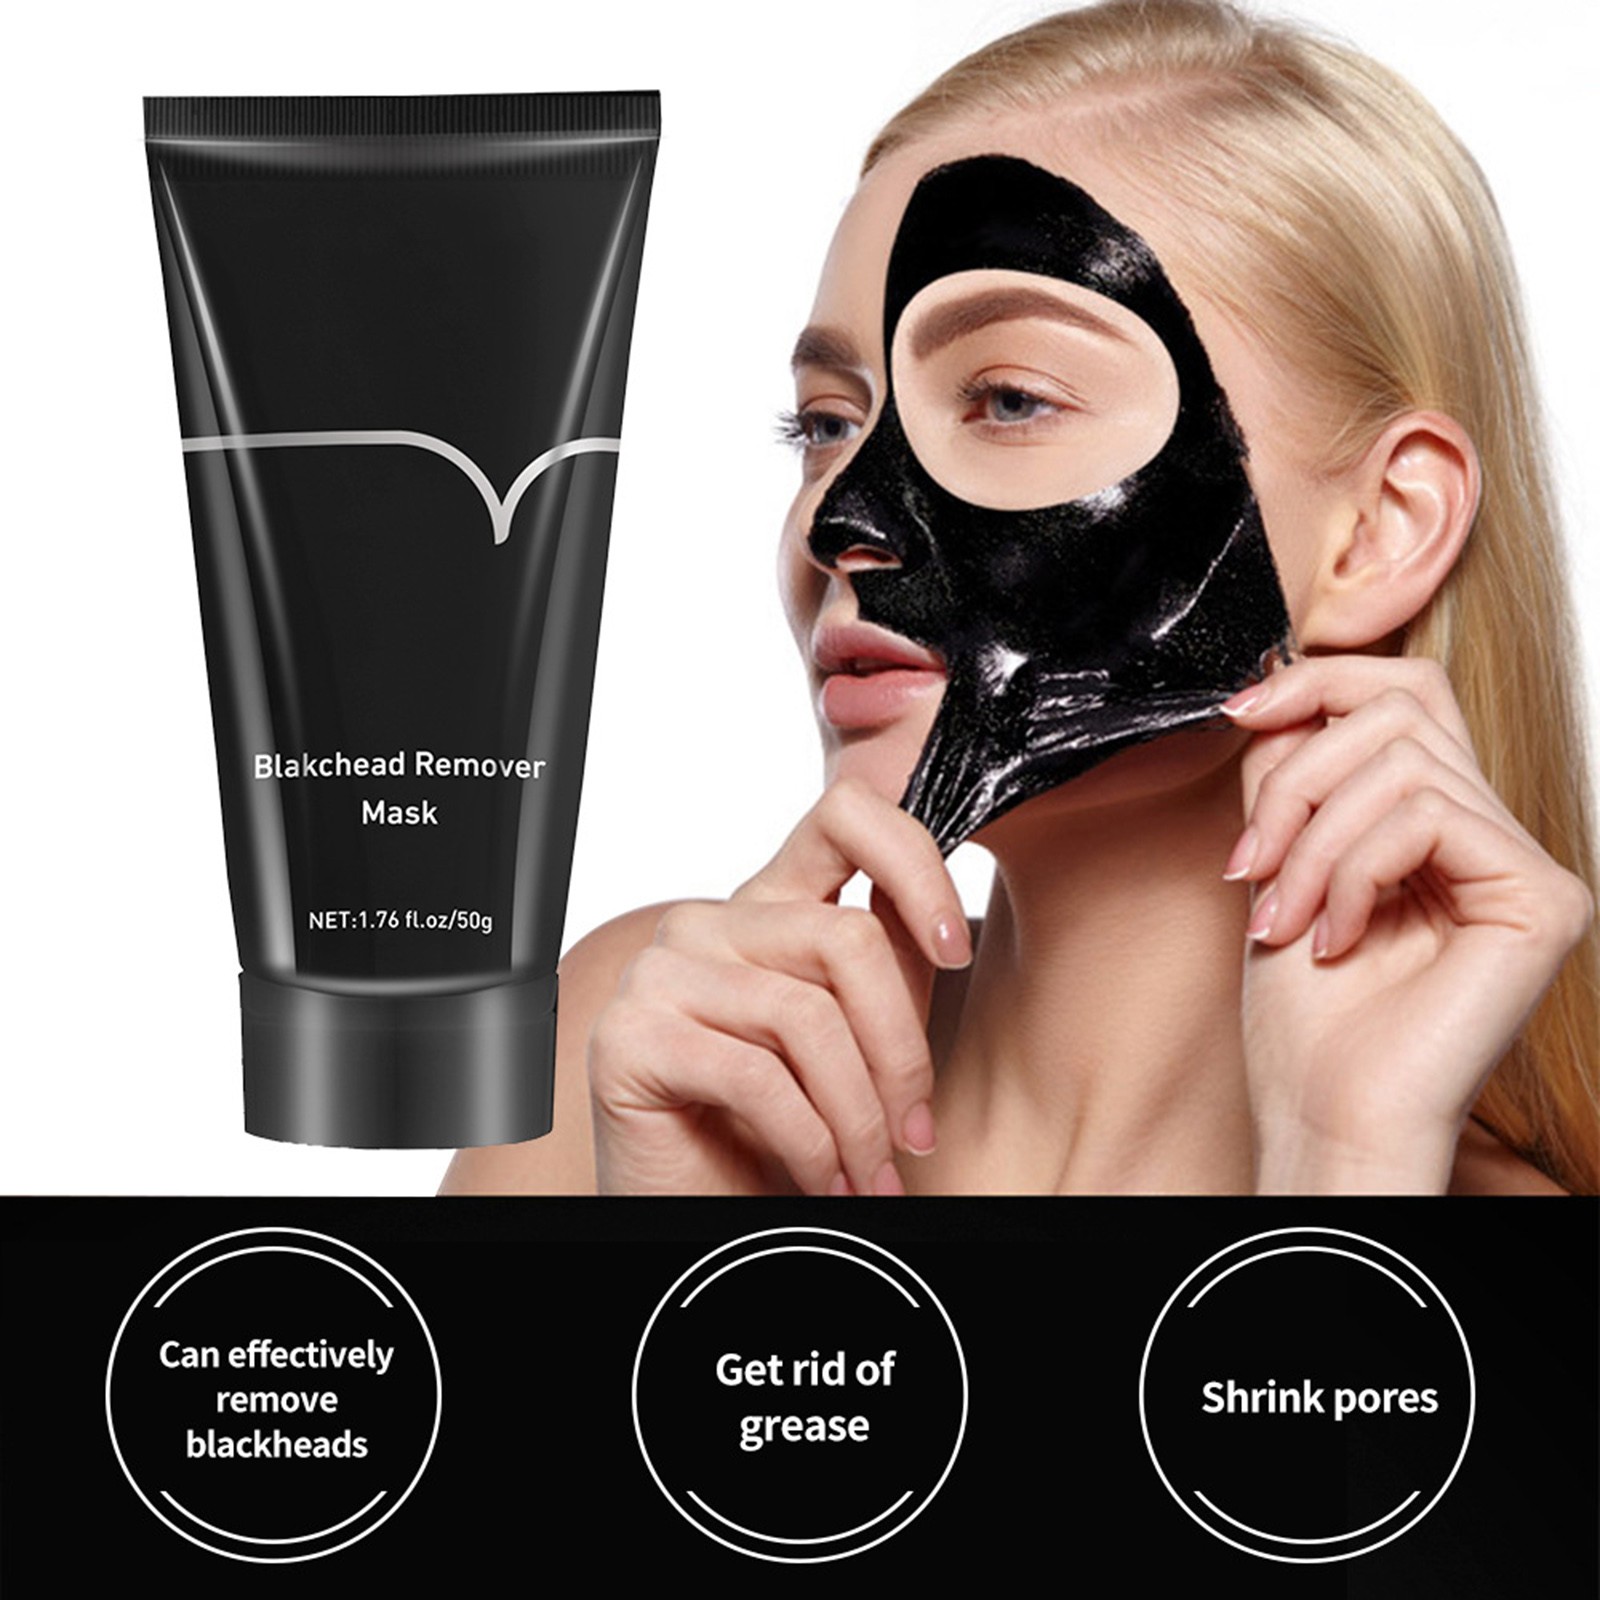 Melotizhi Blackhead Removal Purifying Exfoliating For Deep Cleaning Blackheads Dirt Pores Nose 50g - image 4 of 8